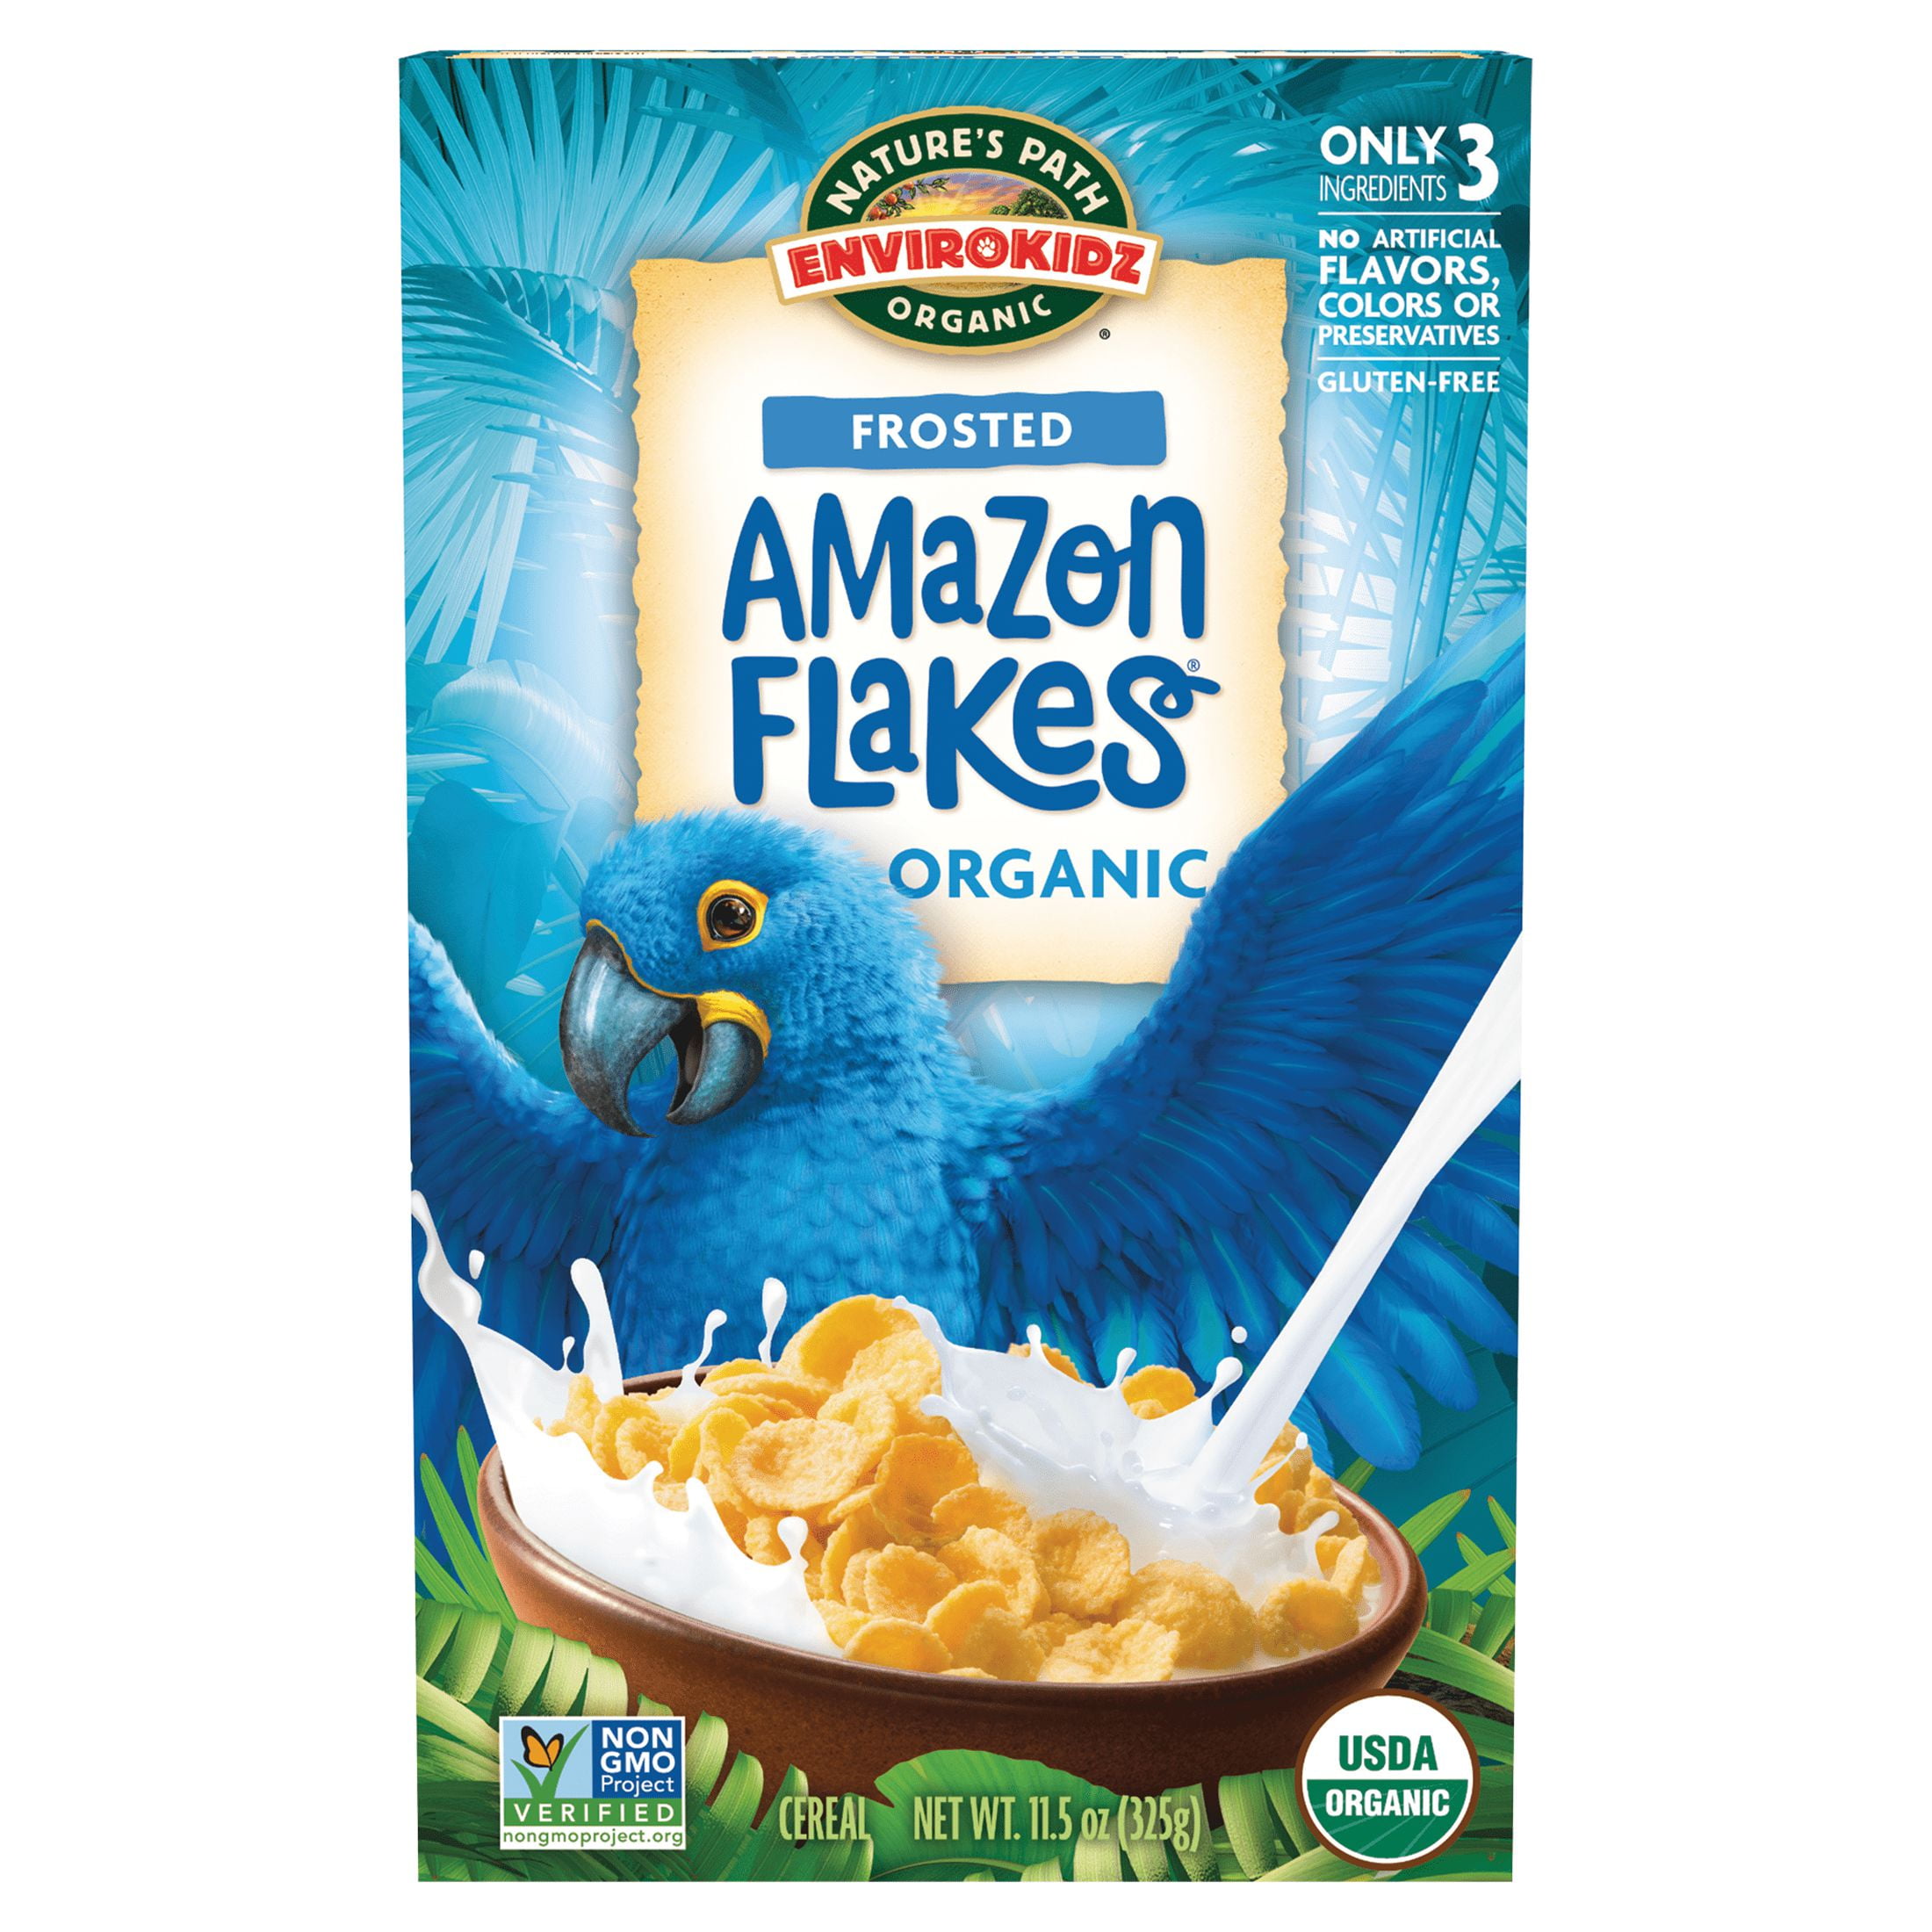 Organic Corn Flakes Cereal, 12 Ounce, Shipped to You